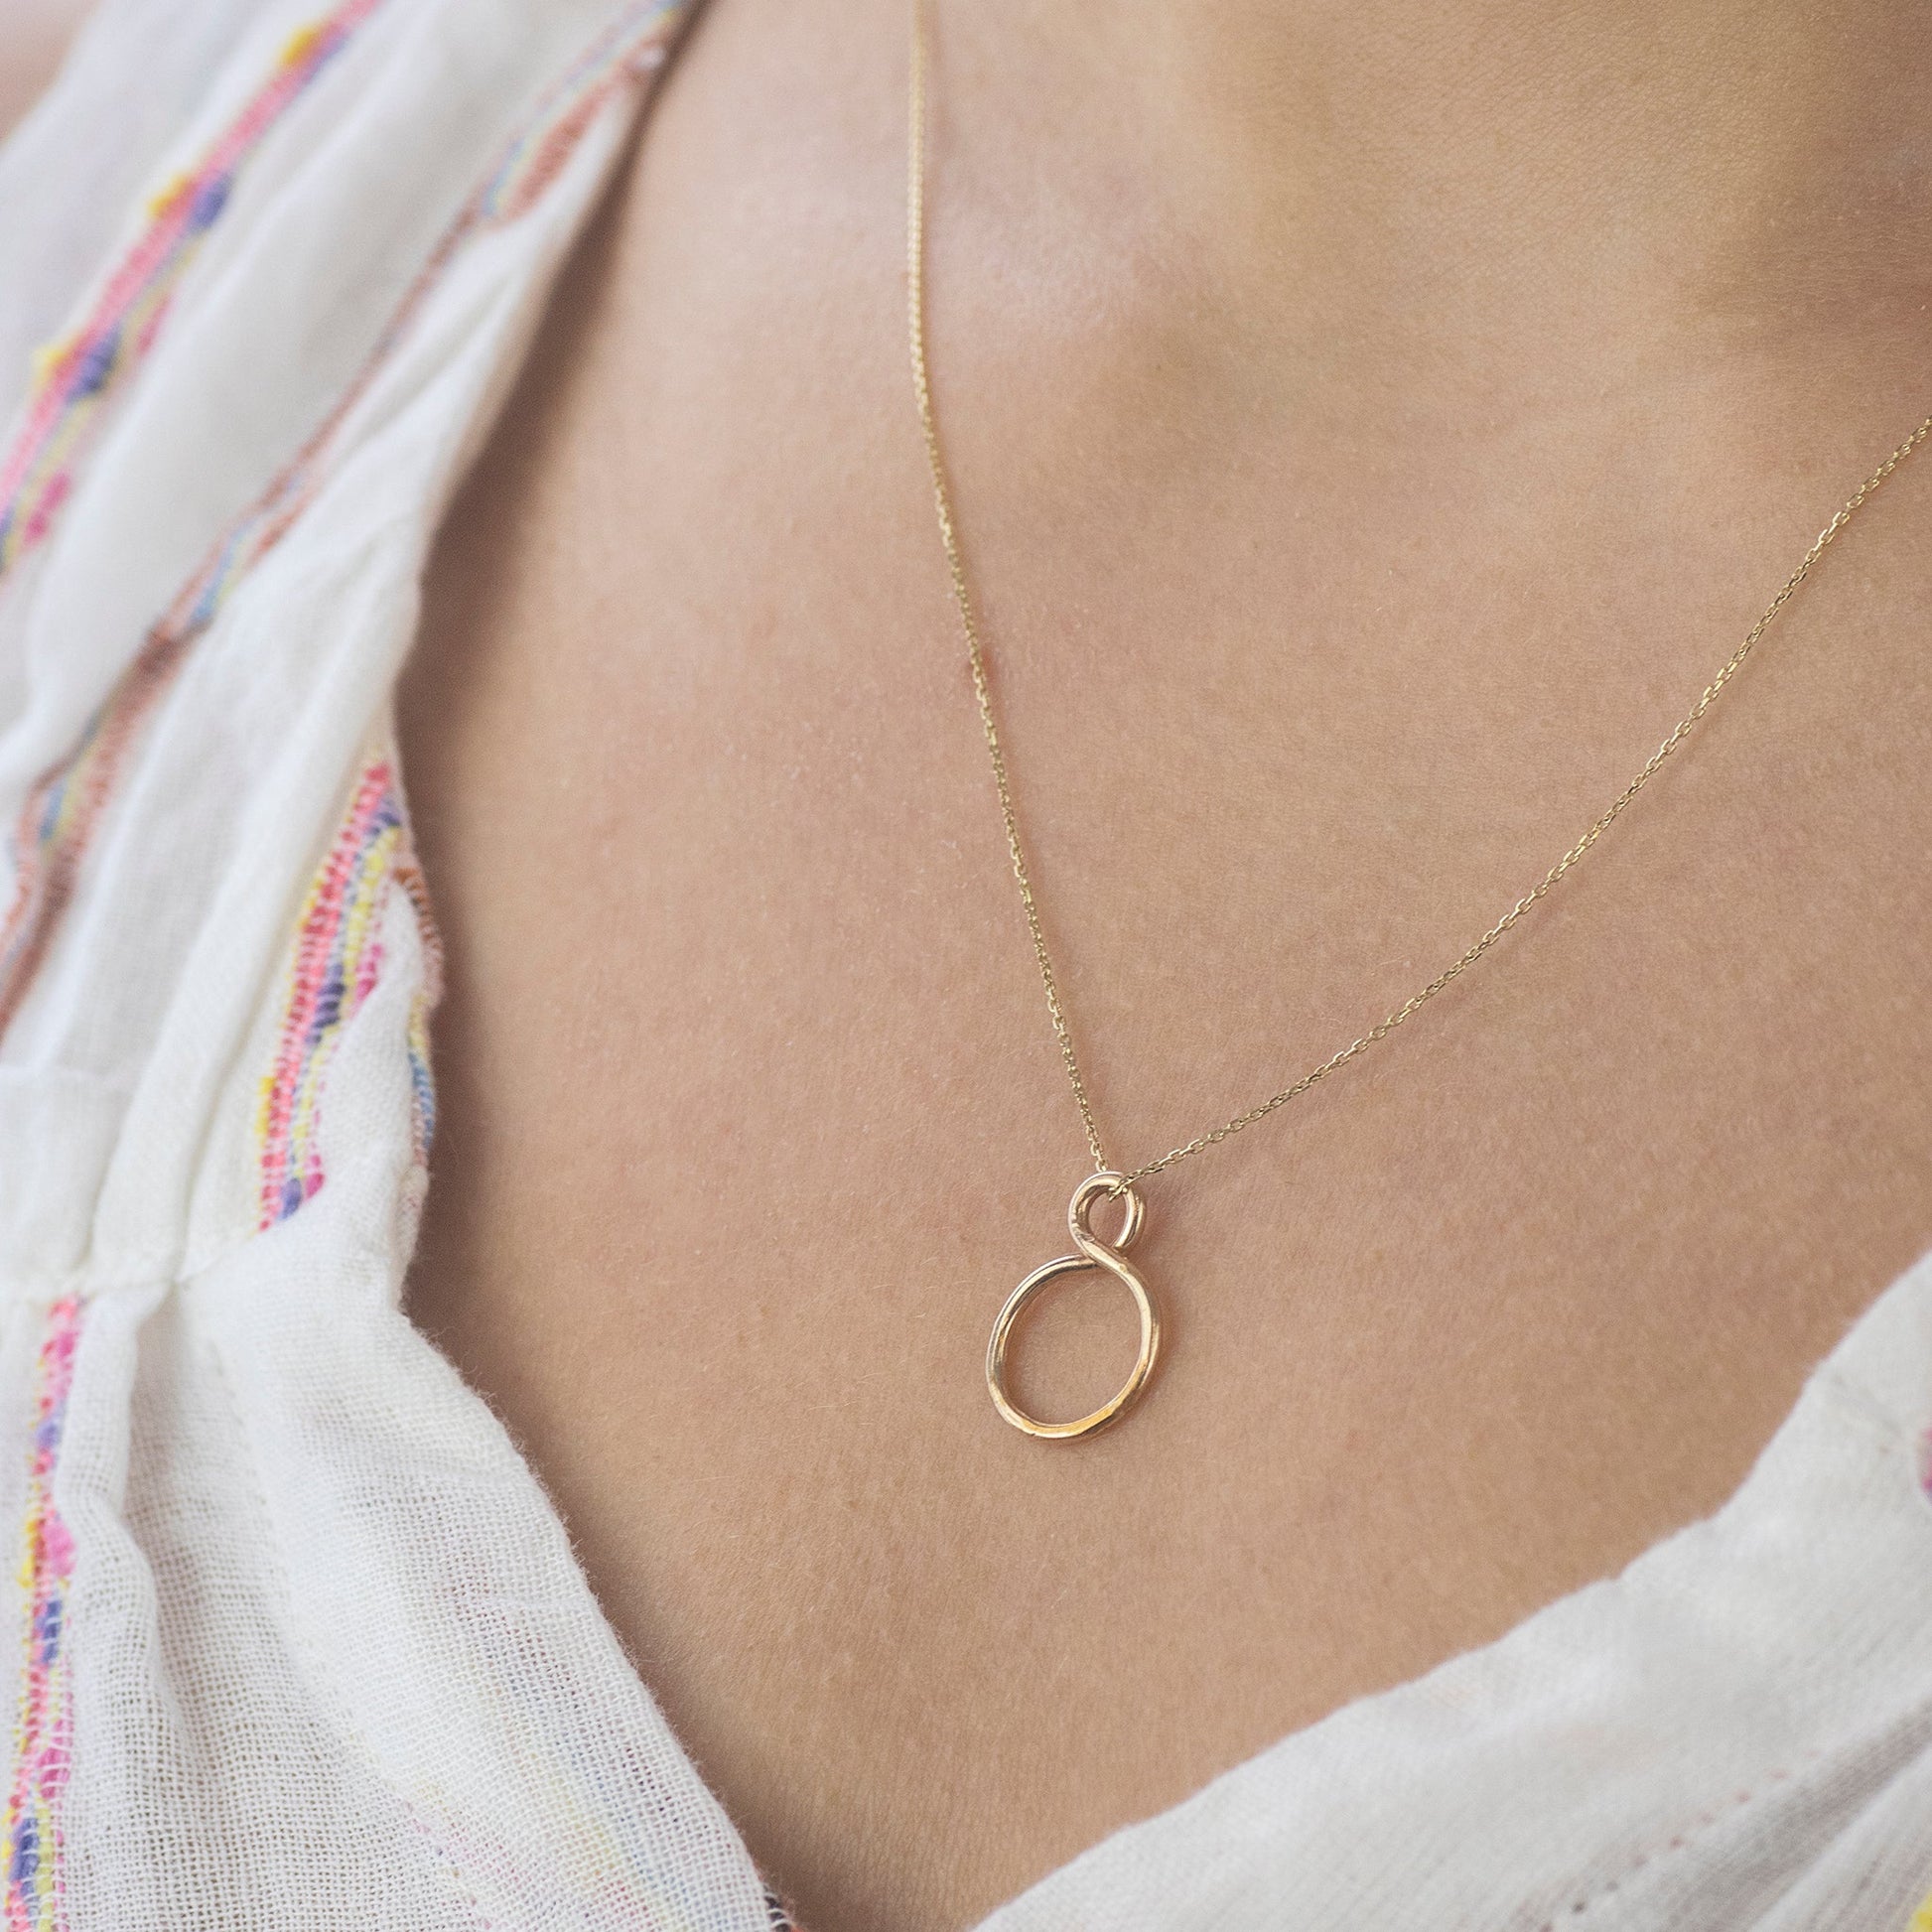 Quinceañera Gift - Tiny Infinity Necklace - 9kt Gold